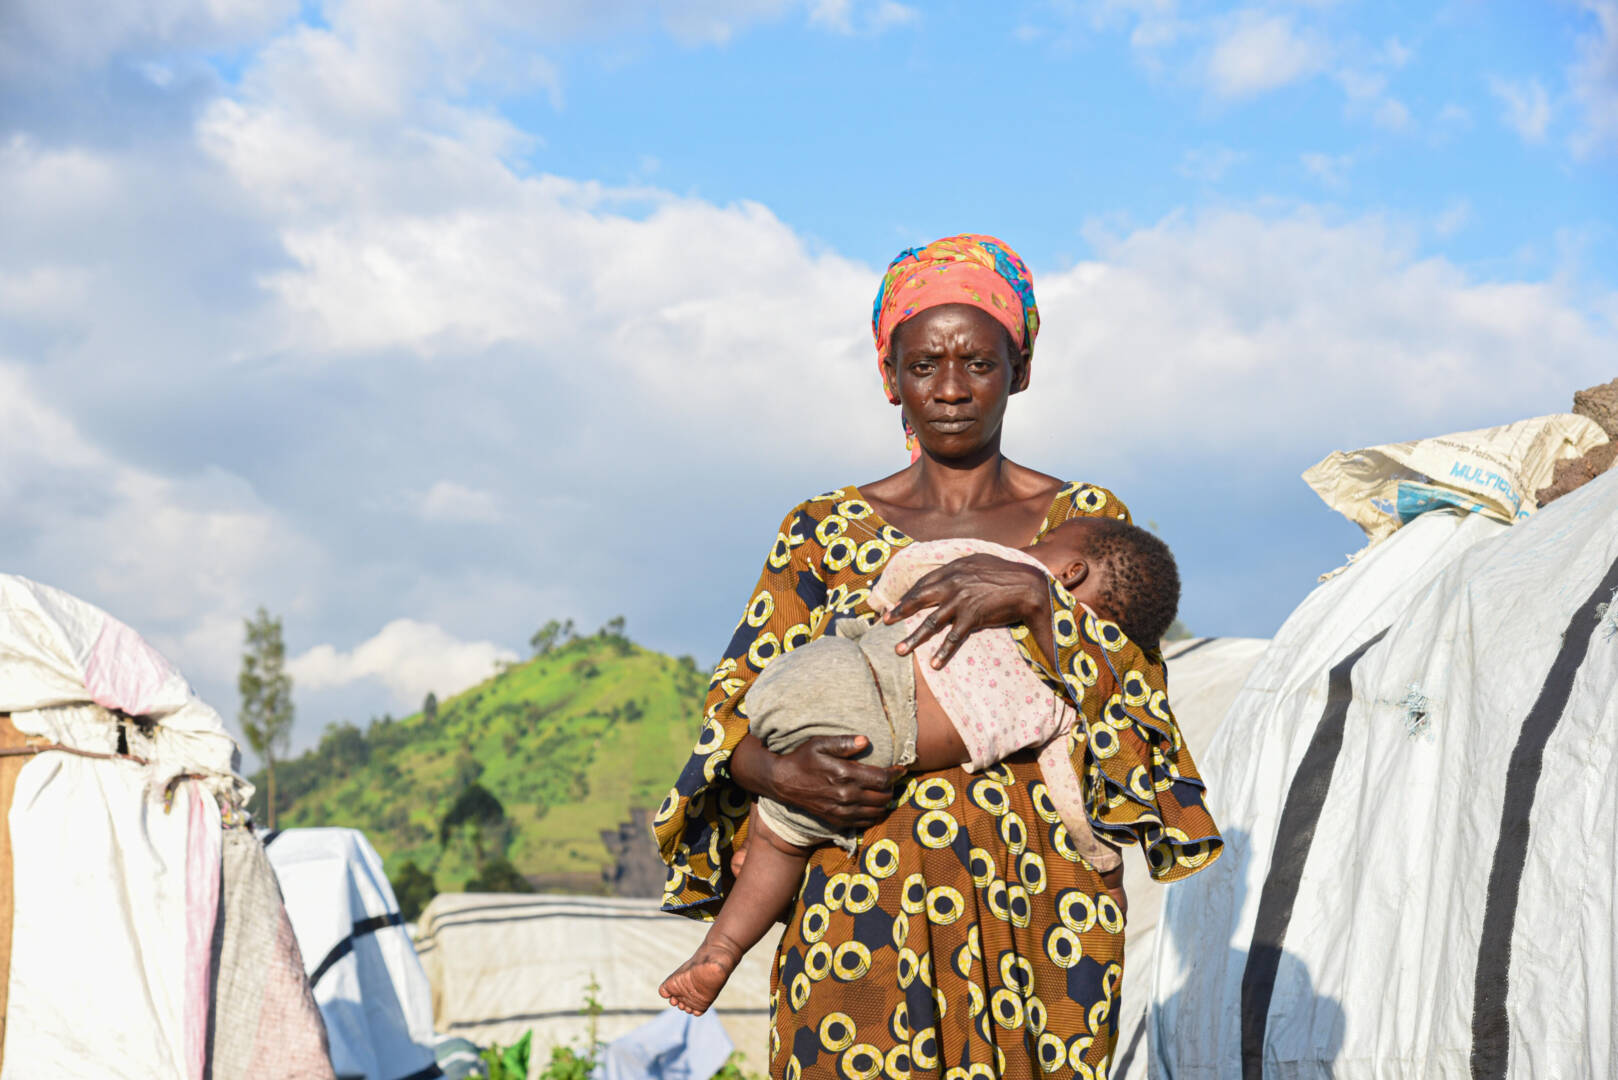 A woman wearing a patterned dress holds a sleeping infant in her arms. She stands between two rows of makeshift tents.